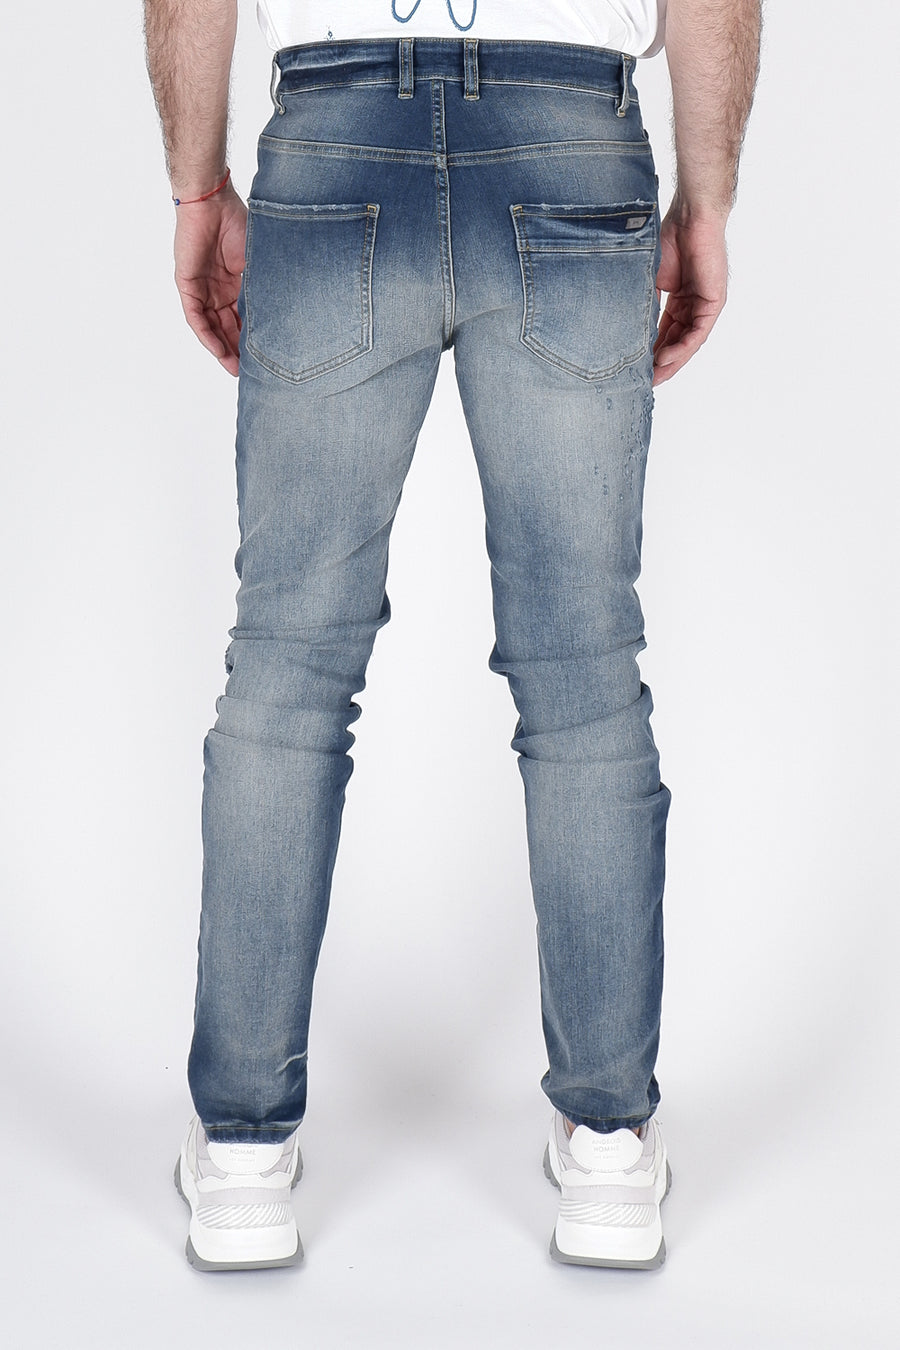 Buy the RH45 Eldorado ND06-M Jean in Blue at Intro. Spend £50 for free UK delivery. Official stockists. We ship worldwide.